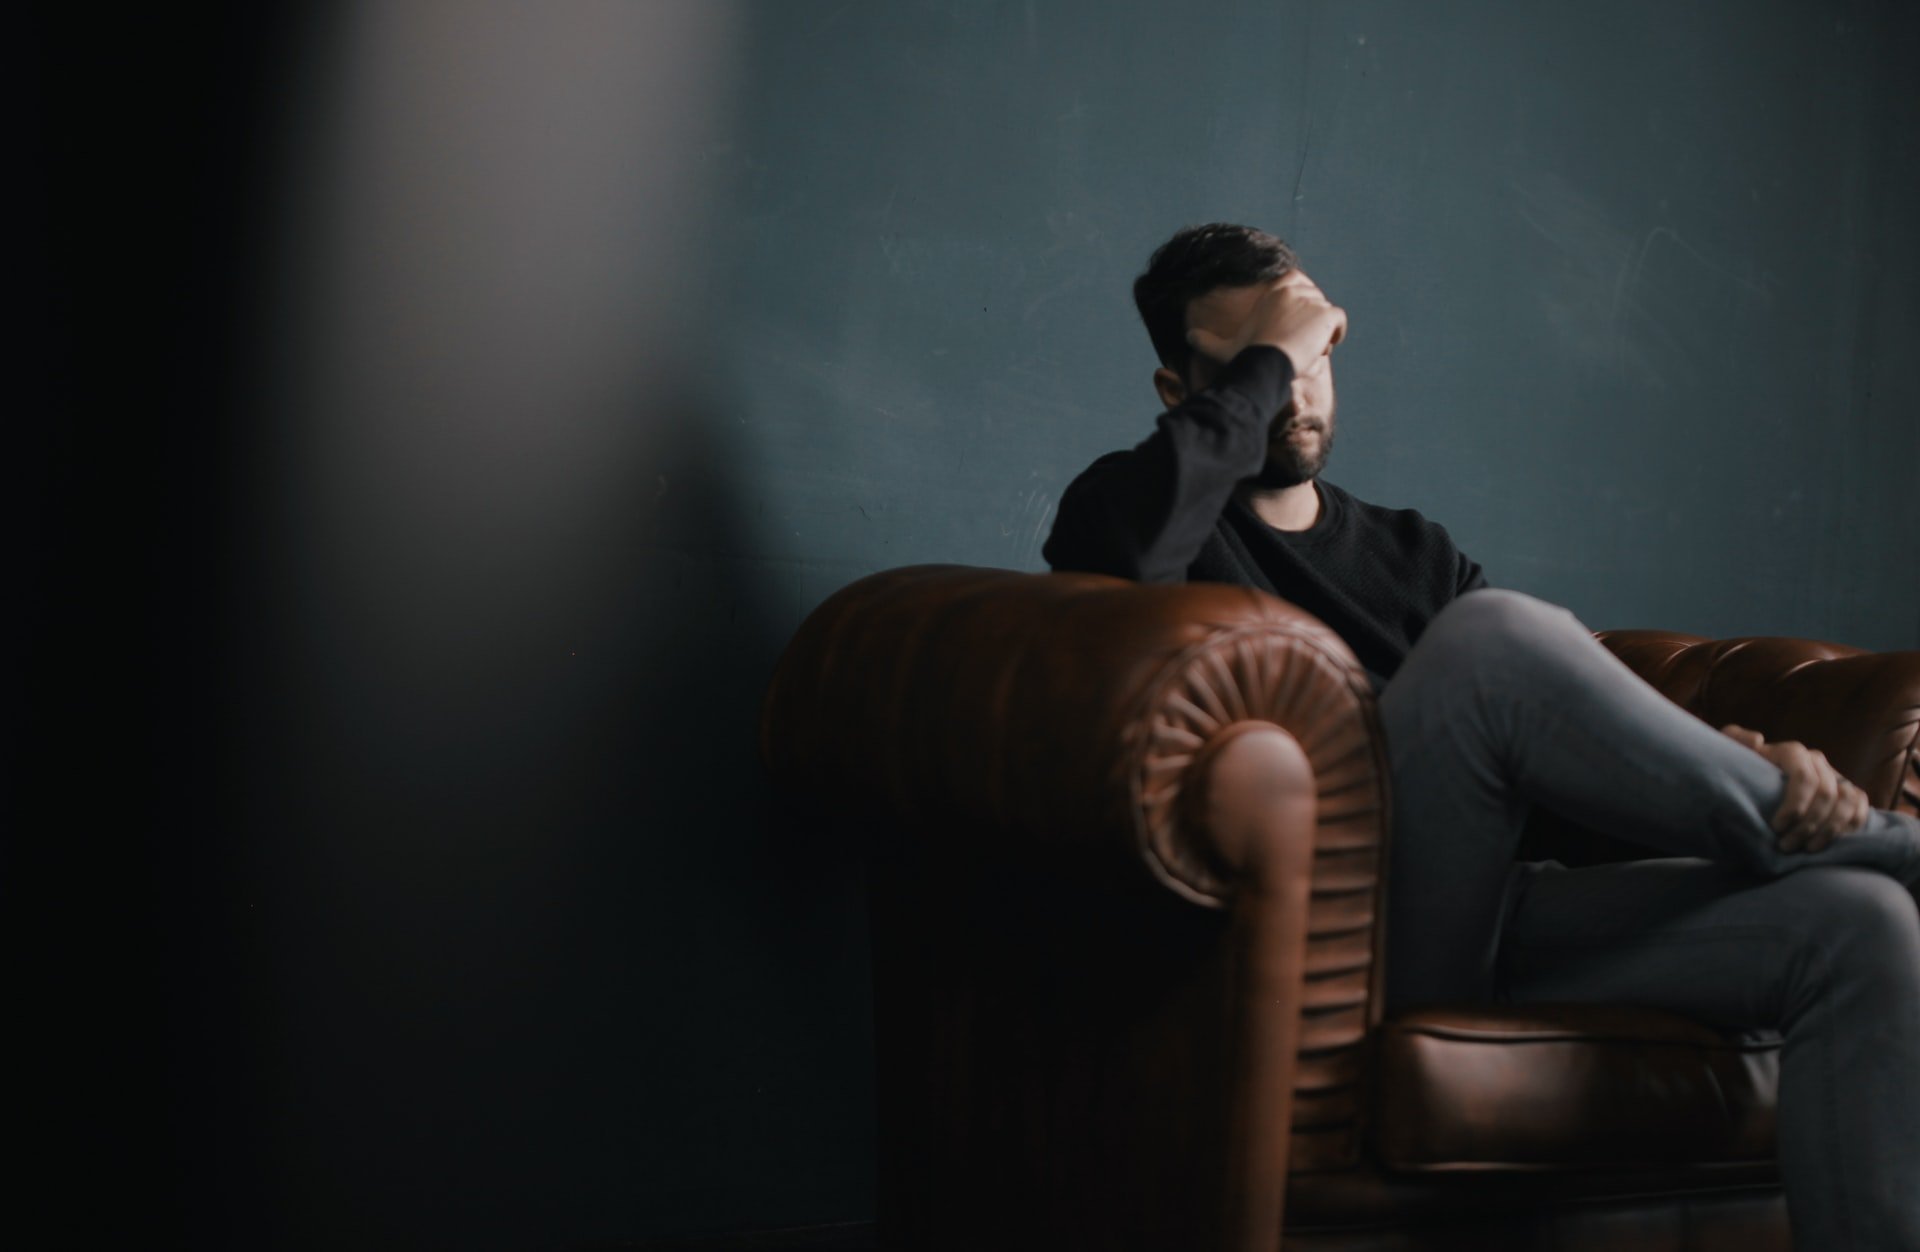 An upset man sitting on a couch with his hand over his forehead | Source: Unsplash